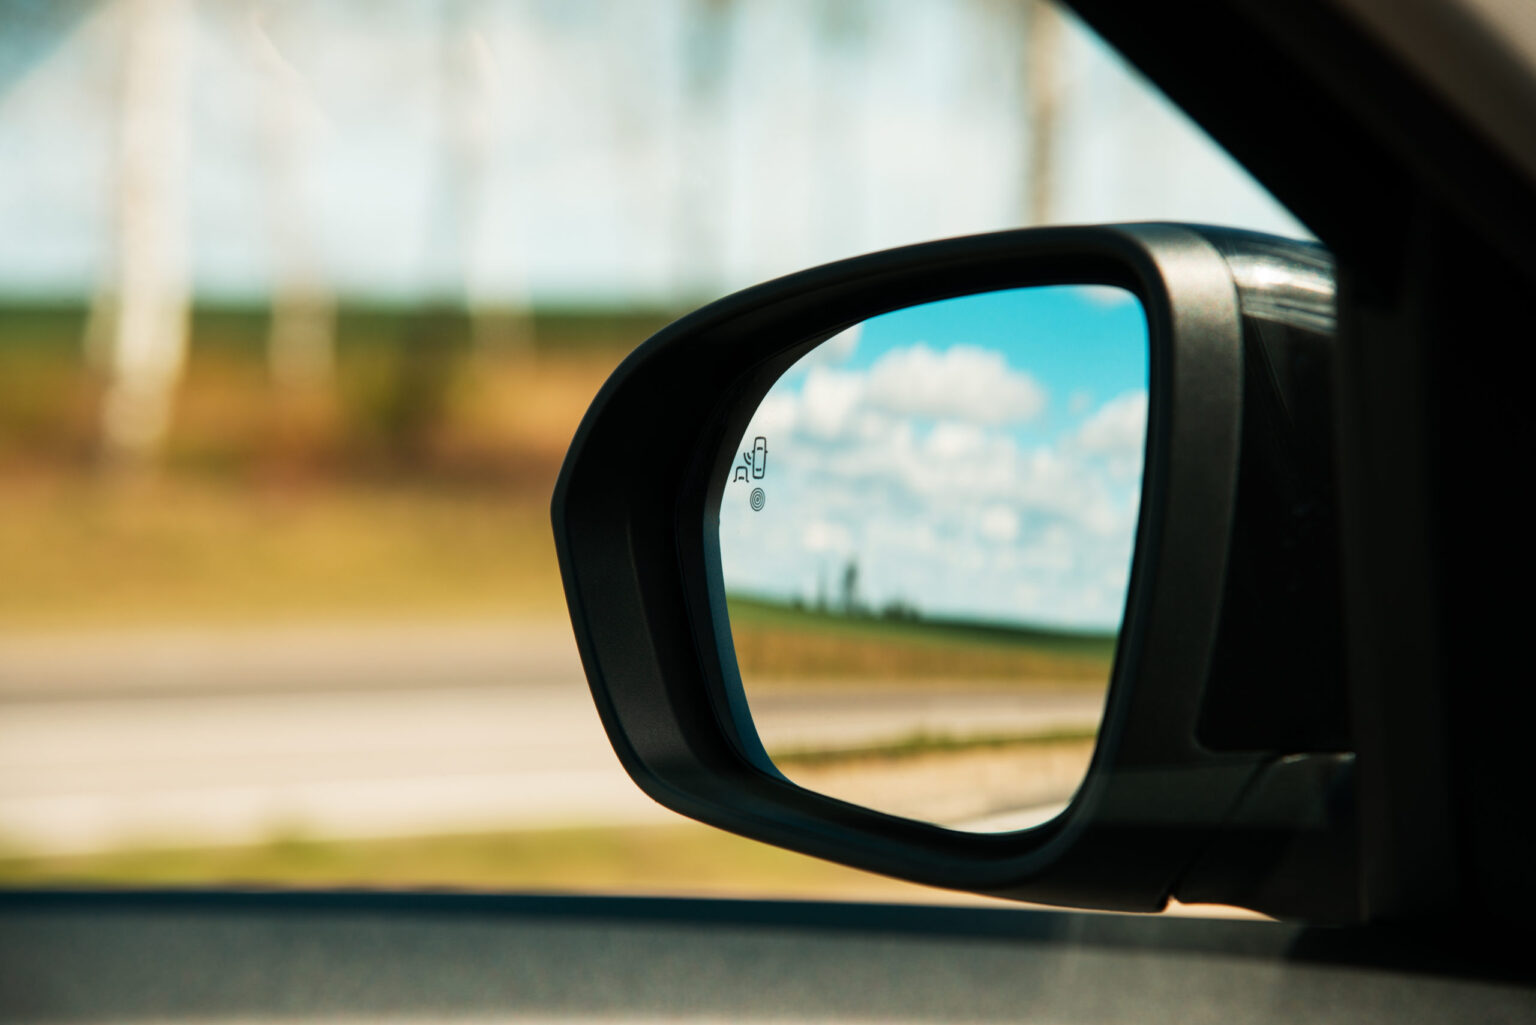 A blind spot monitoring sensor on the side mirror of a modern car.